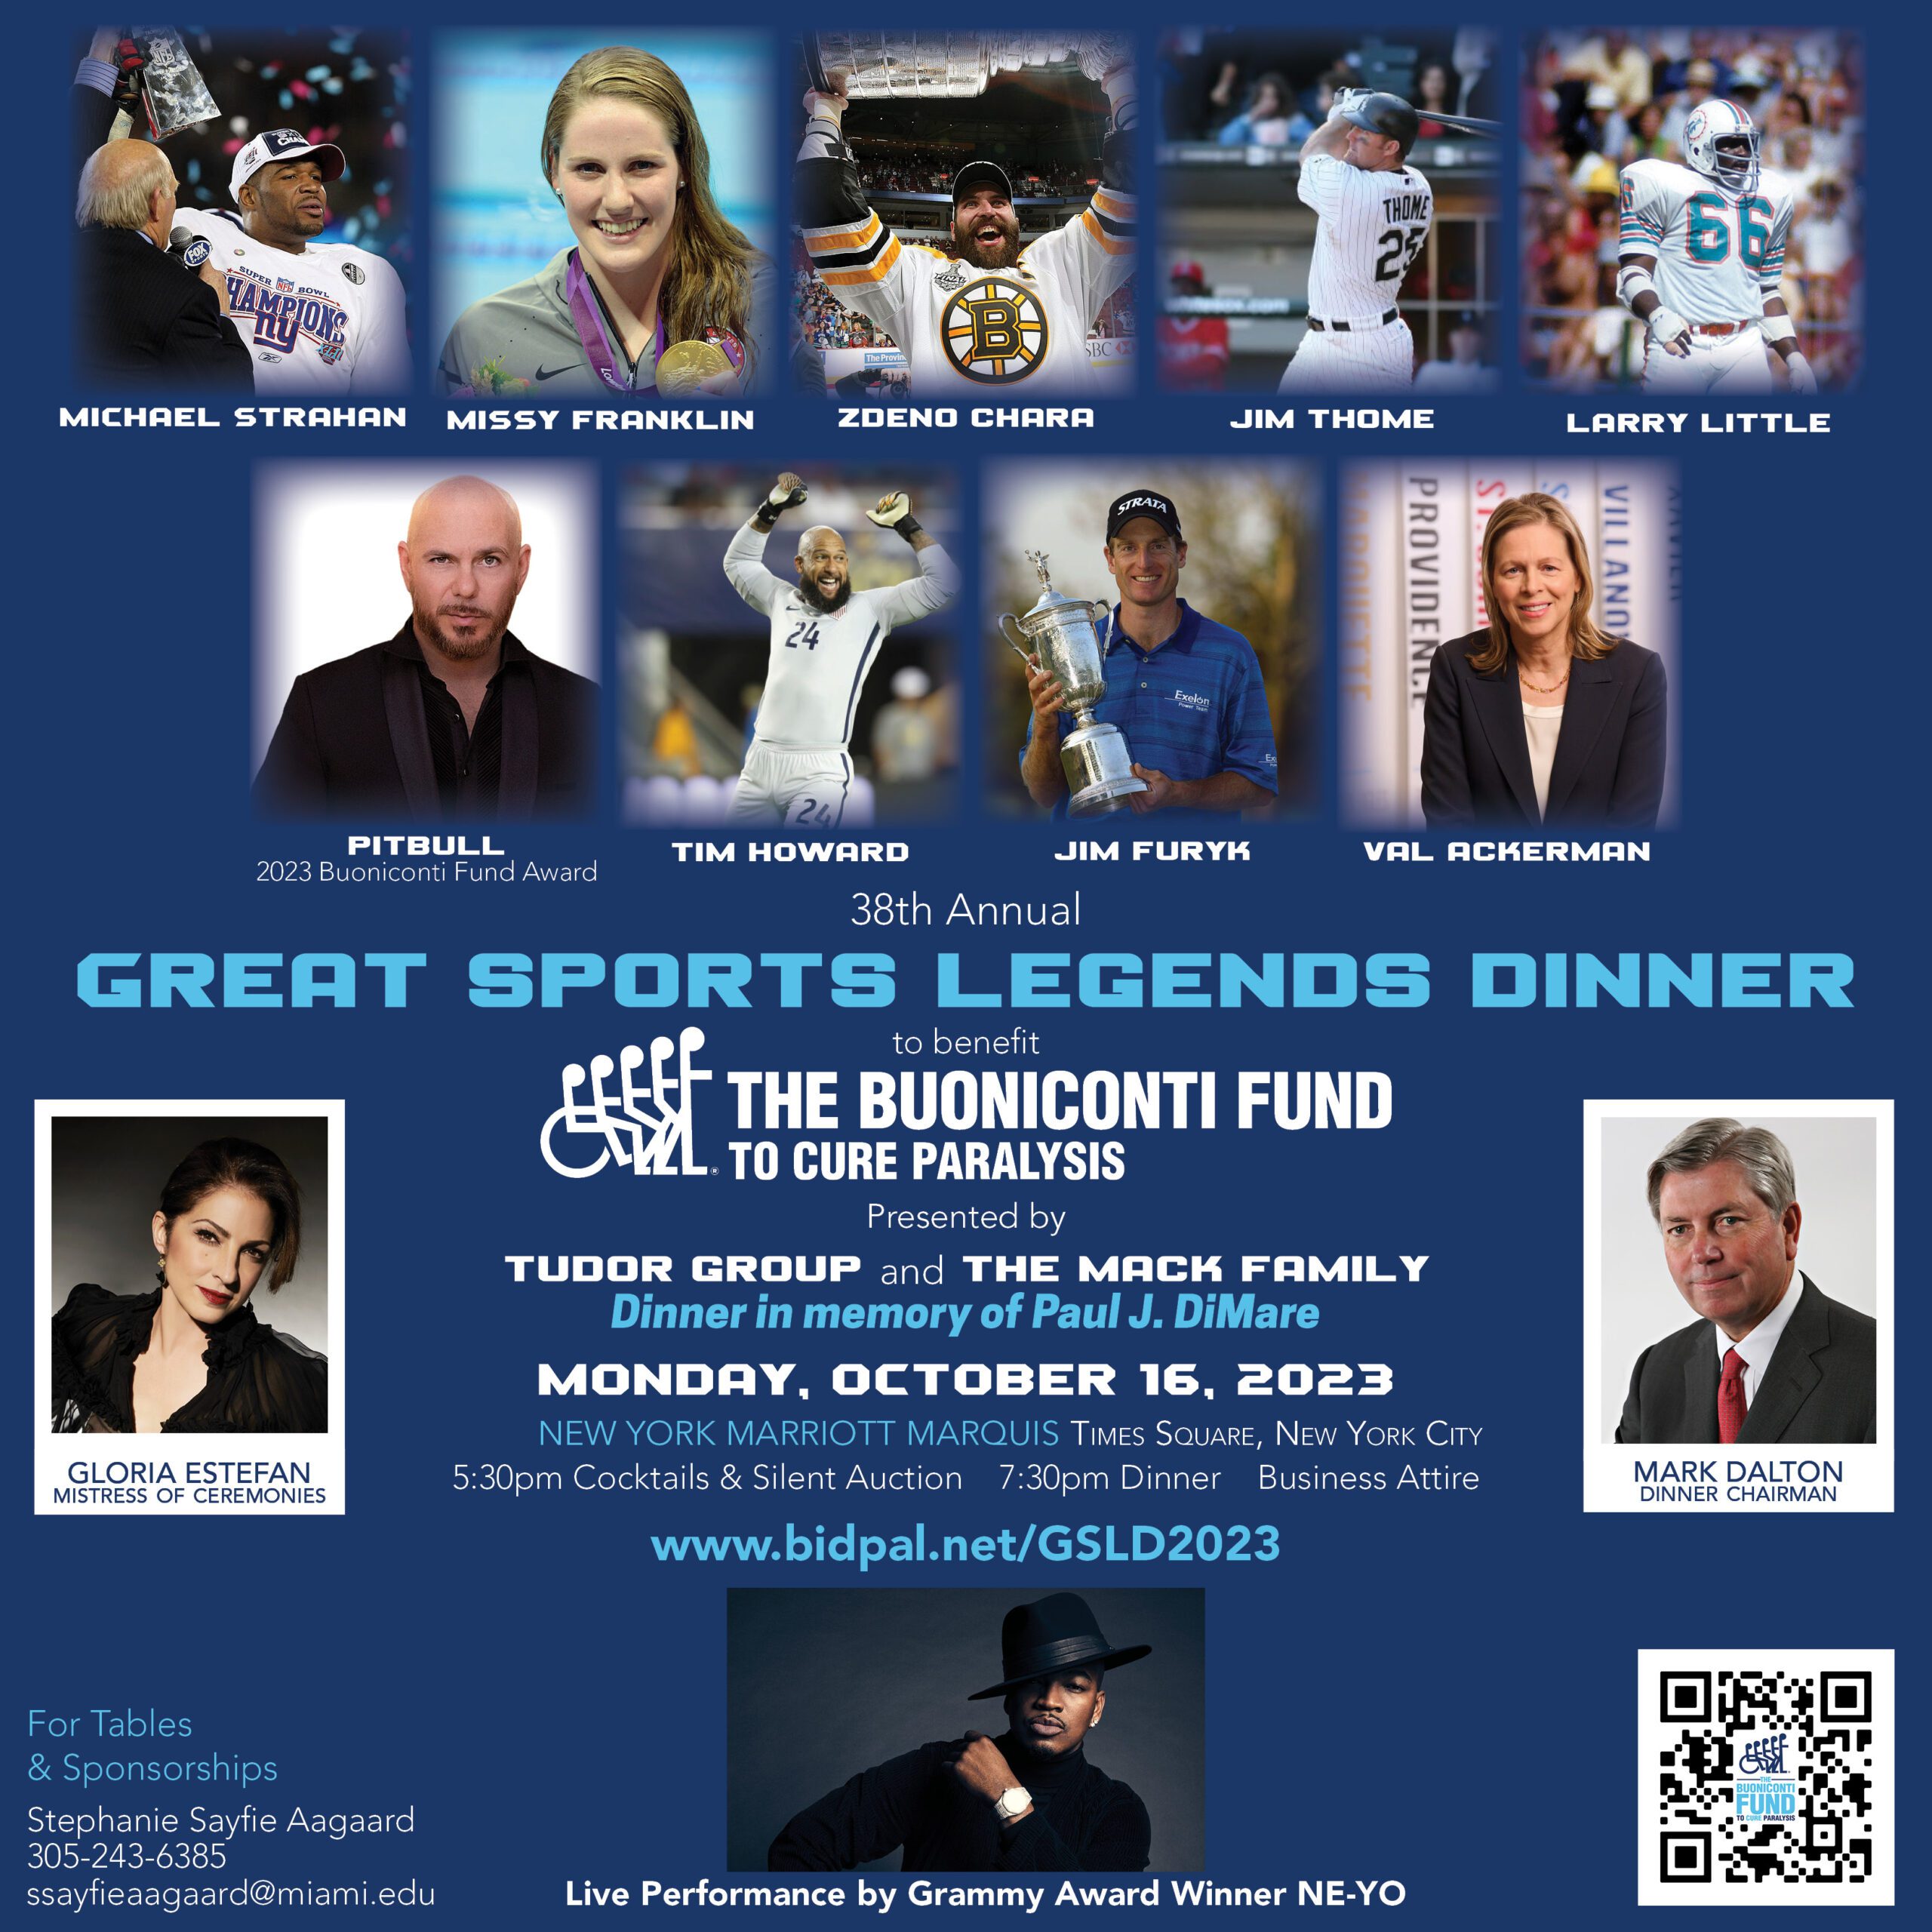 38th Annual Great Sports Legends Dinner presented by Tudor Group and The Mack Family